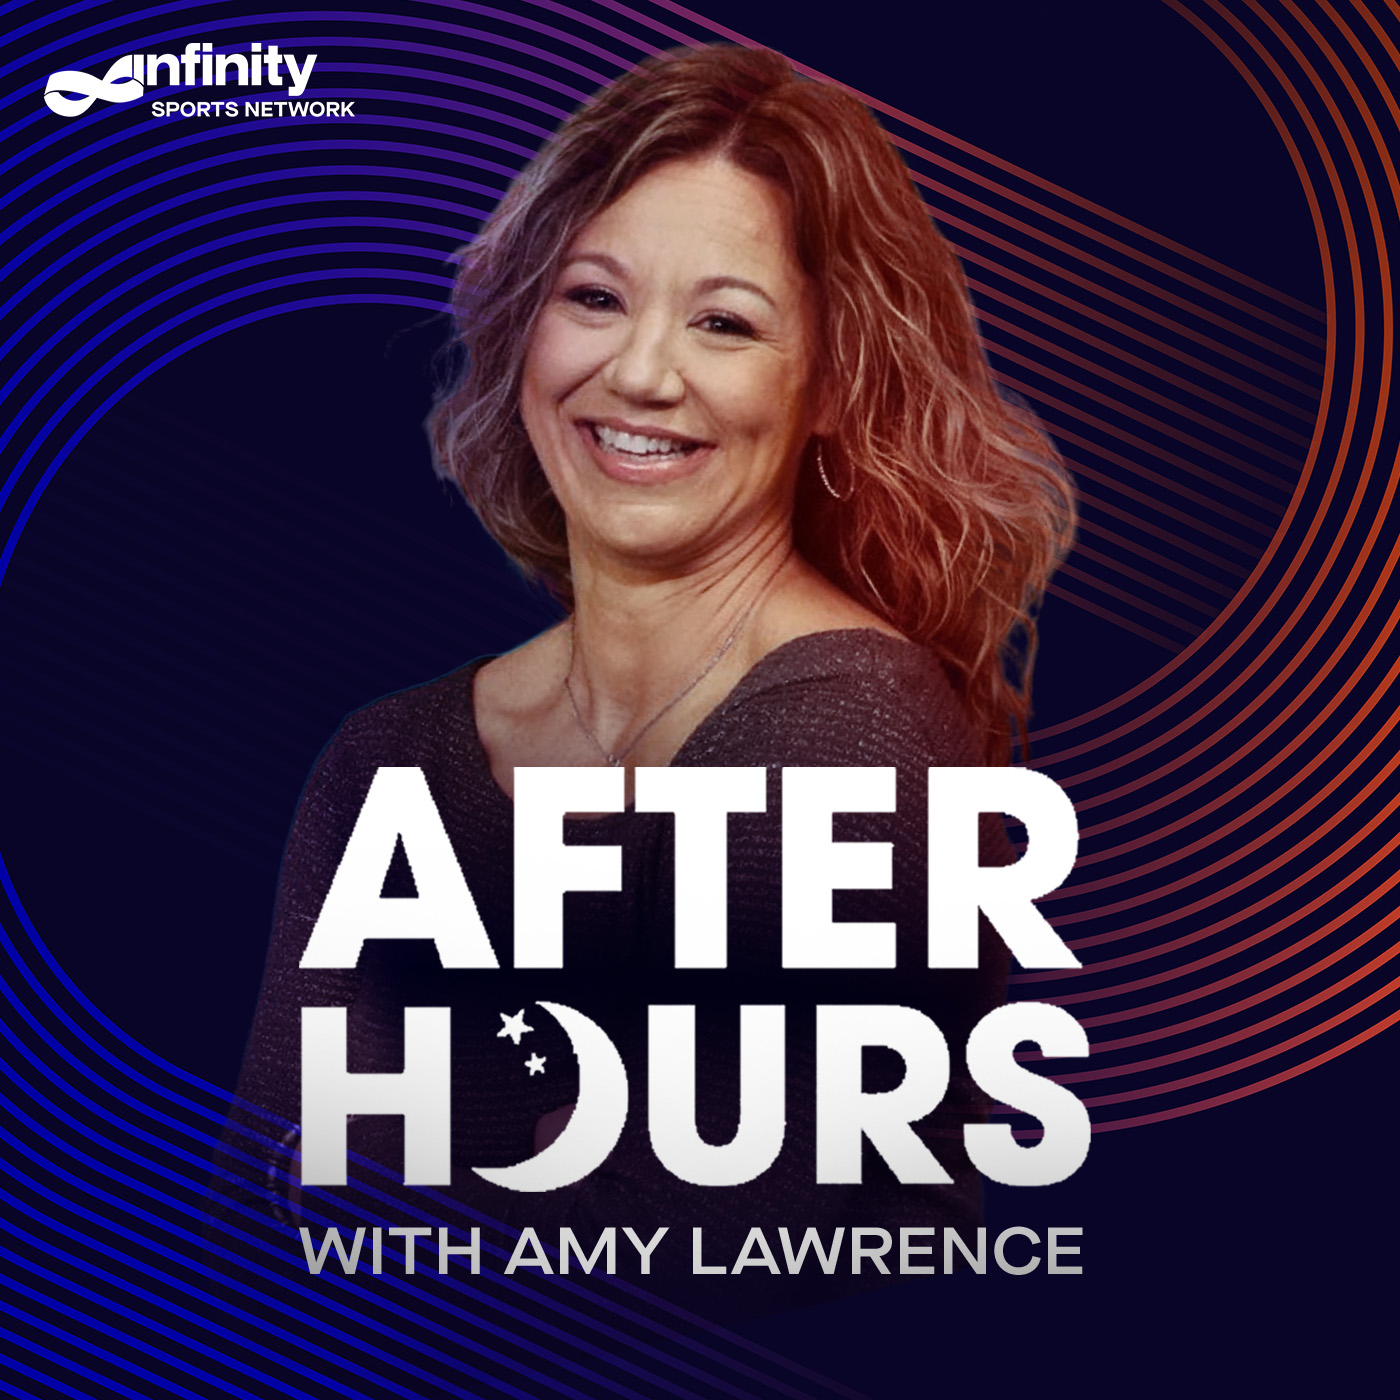 5/31/21 After Hours with Amy Lawrence PODCAST: Hour 2